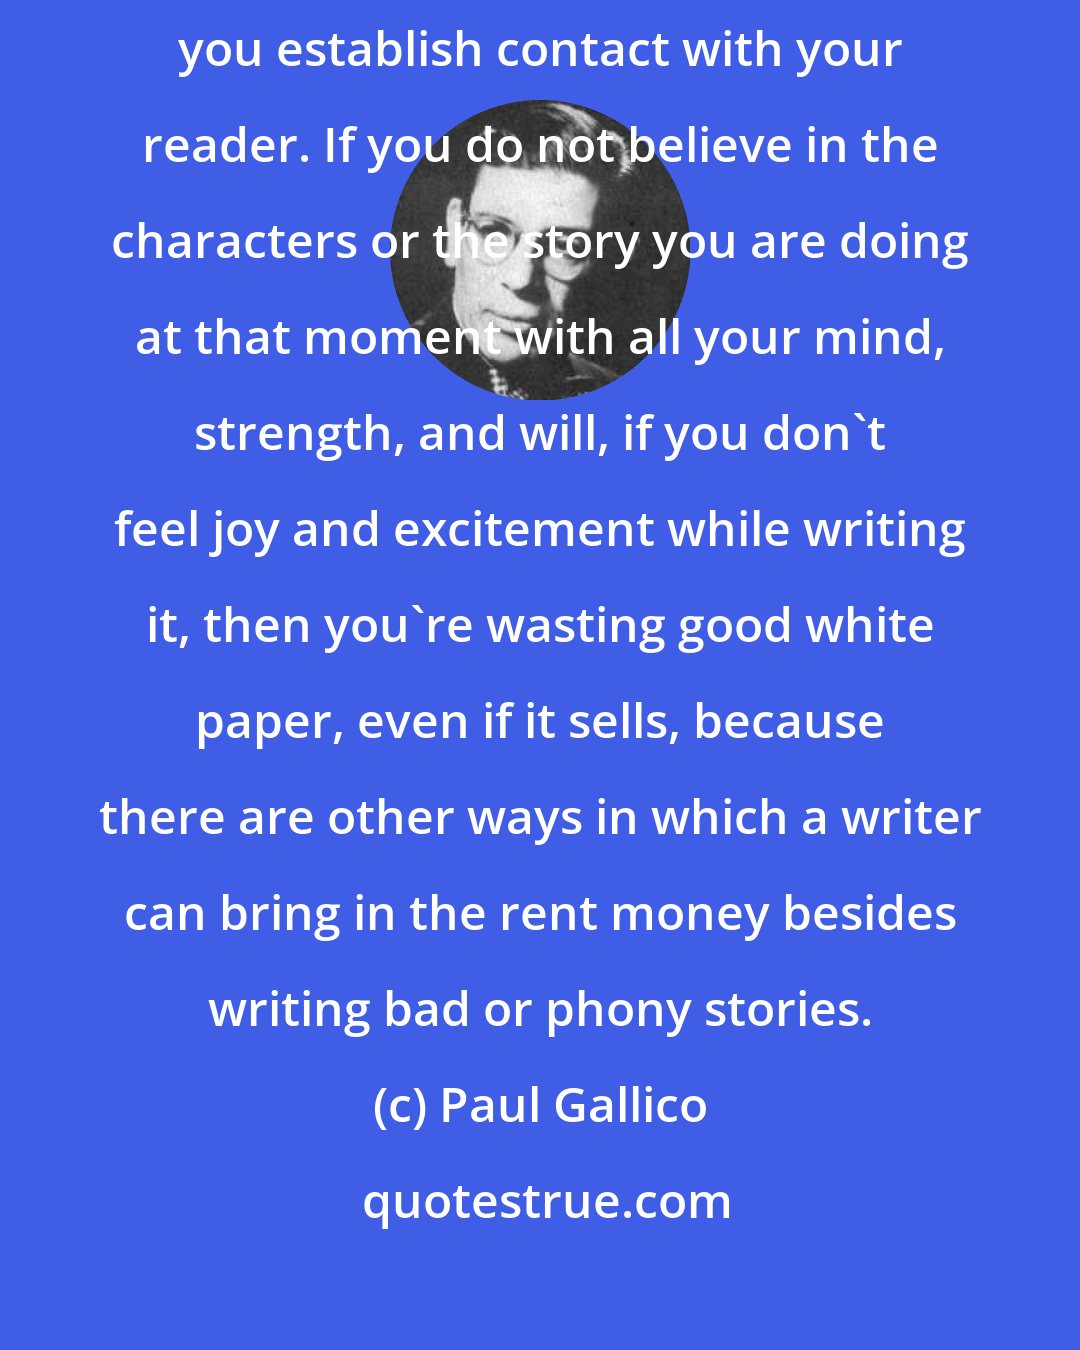 Paul Gallico: It is only when you open your veins and bleed onto the page a little that you establish contact with your reader. If you do not believe in the characters or the story you are doing at that moment with all your mind, strength, and will, if you don't feel joy and excitement while writing it, then you're wasting good white paper, even if it sells, because there are other ways in which a writer can bring in the rent money besides writing bad or phony stories.